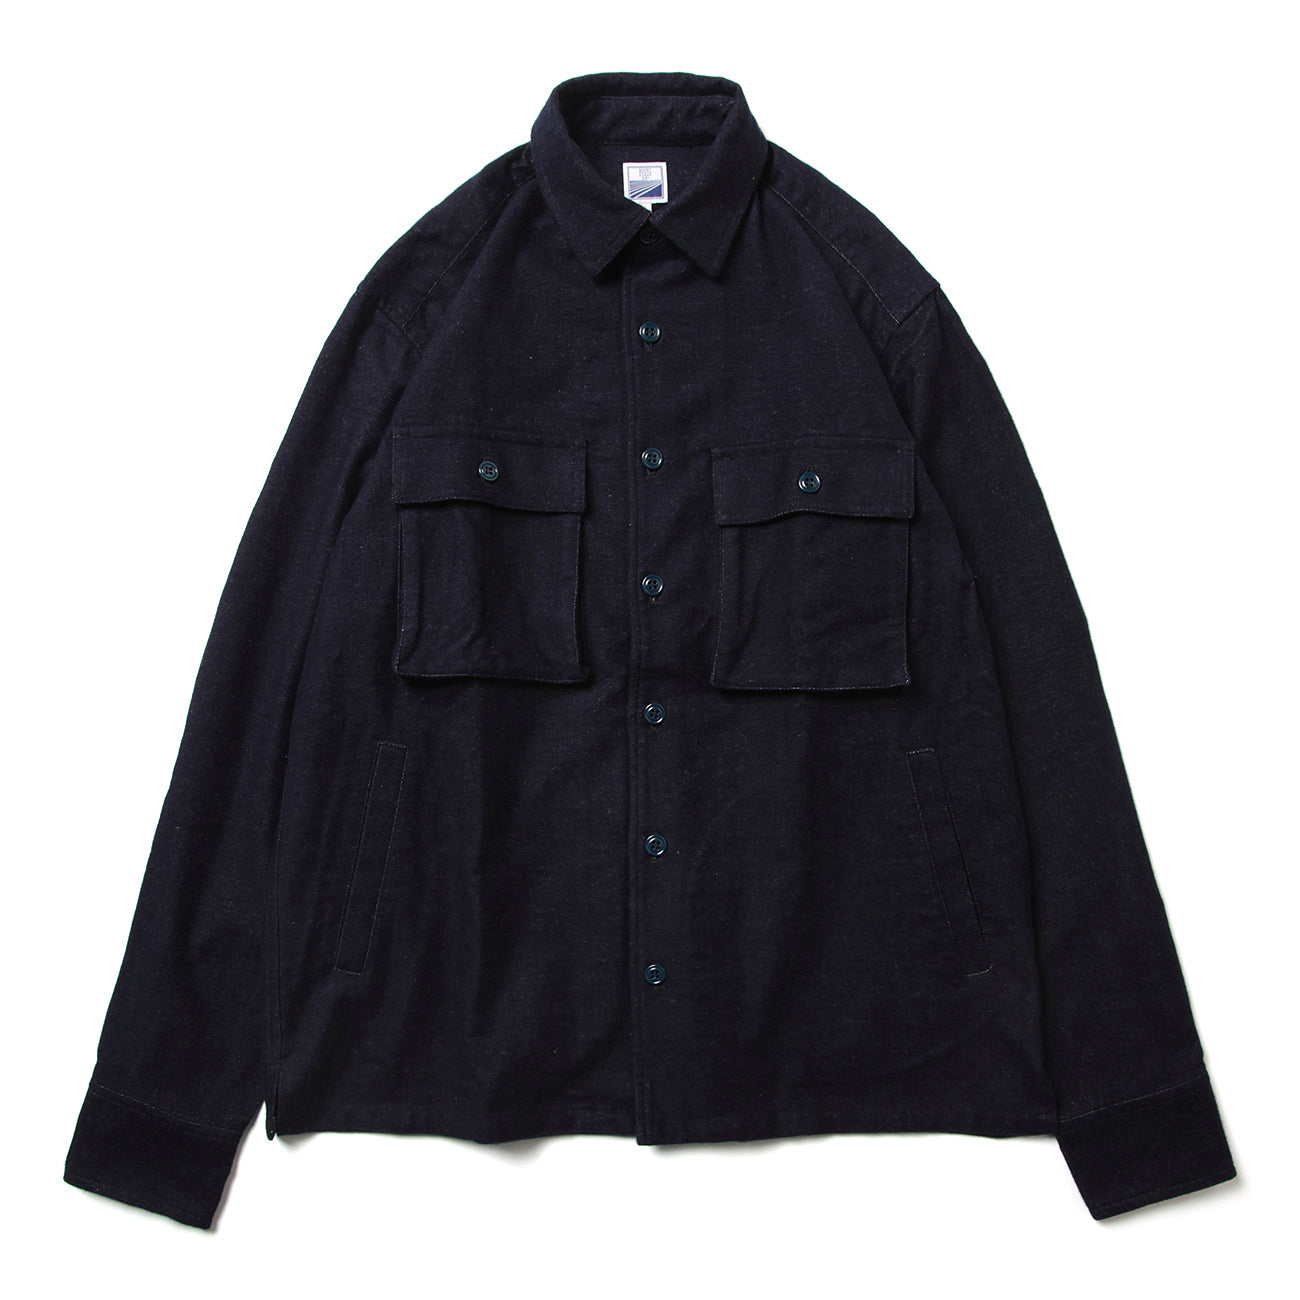 SD SHIRTS (FLANNEL) - NAVY